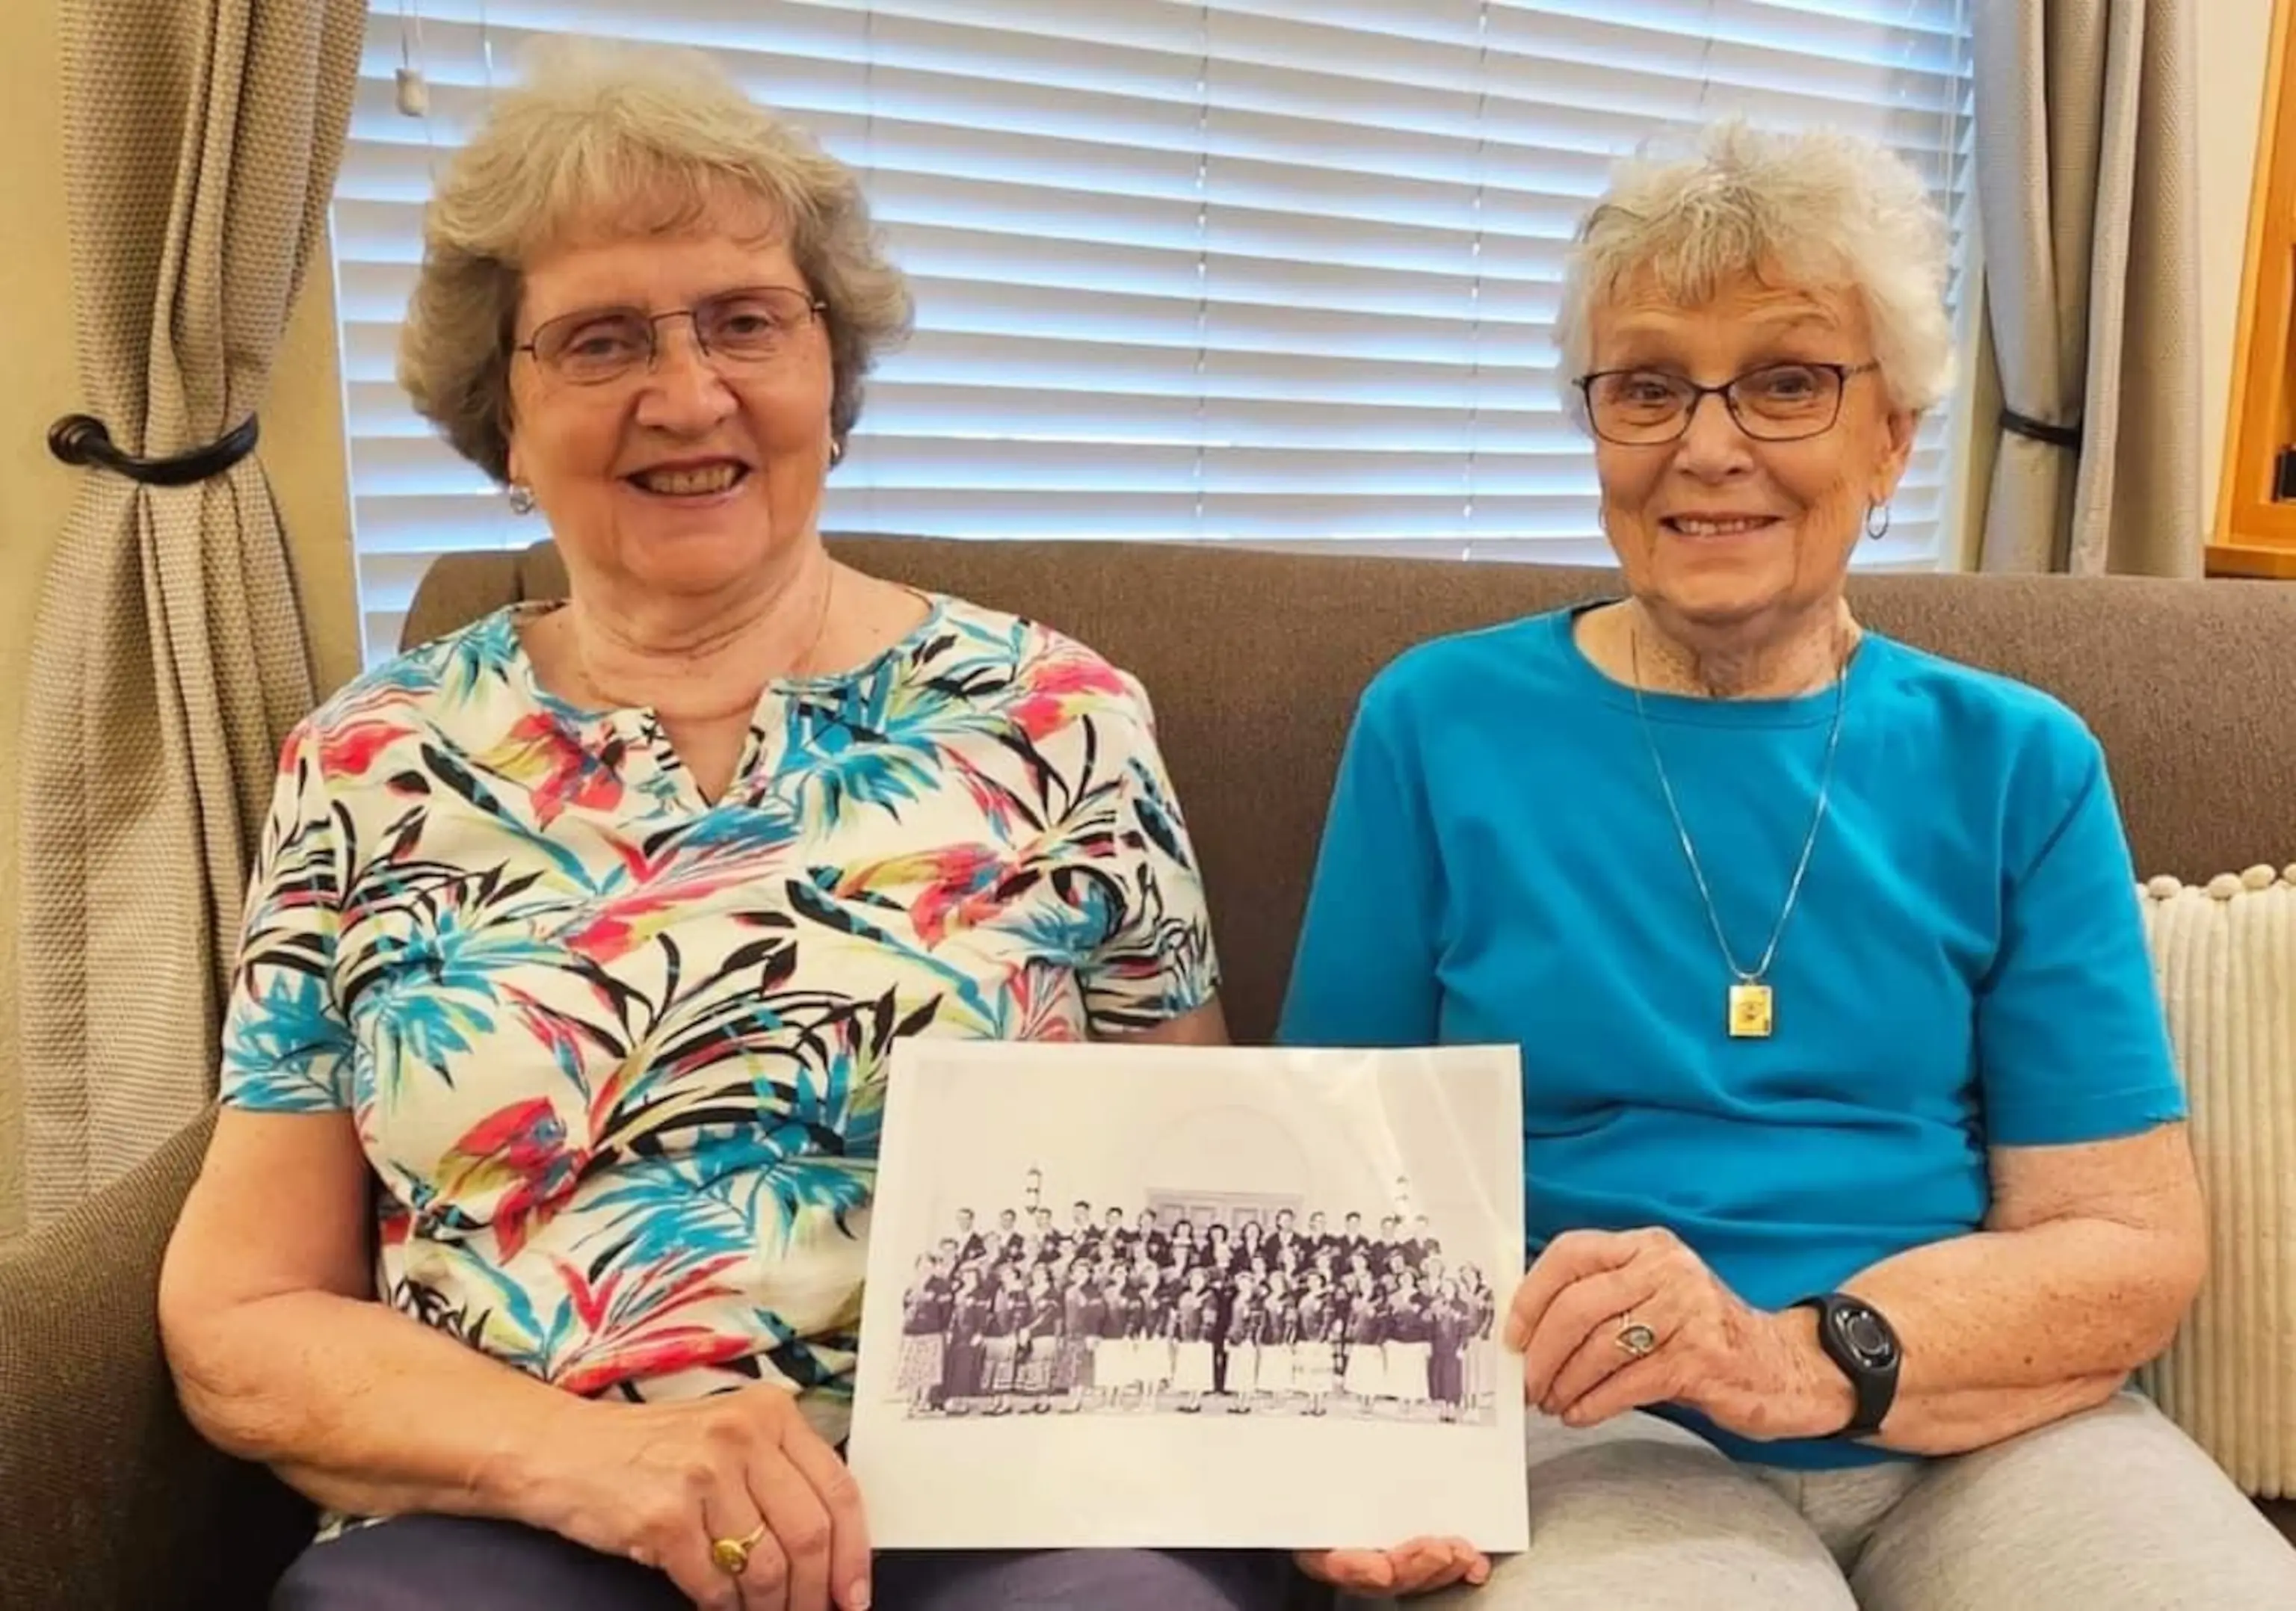 PHOTO: Sylvia Crane, left, and Joan Harris hold a class photo from Mt. St. Mary’s Academy in Grass Valley, California.